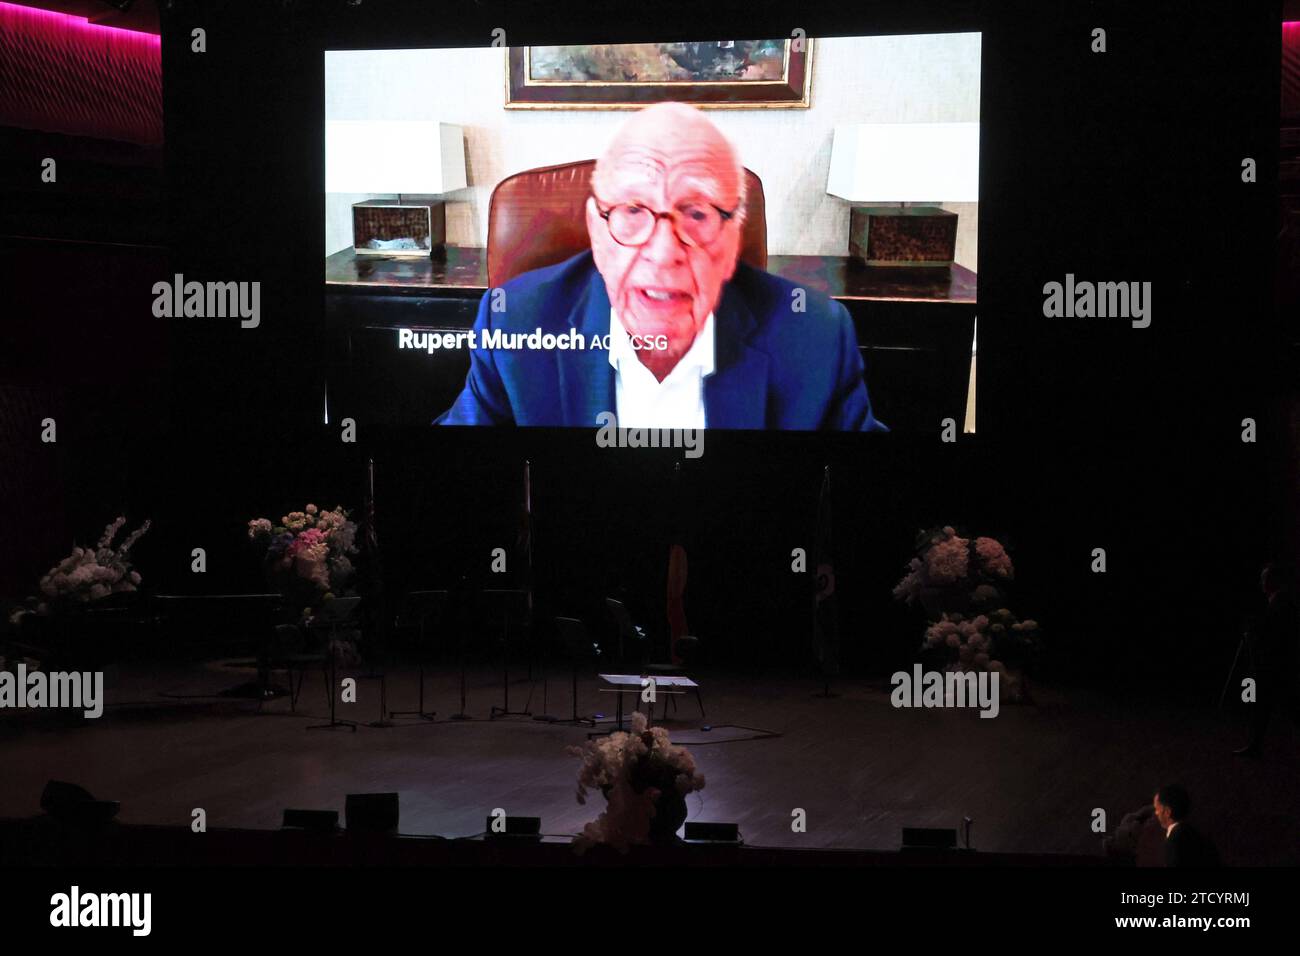 A video tribute from Rupert Murdoch is shown a screen during during the State Memorial Service for Australian comedian and actor Barry Humphries at the Sydney Opera House in Sydney, Friday, December 15, 2023. A State Memorial Service for Barry Humphries will recognise the late entertainers contribution to Australian arts and entertainment. AAP Image/Pool, David Gray NO ARCHIVING SYDNEY NSW AUSTRALIA *** A video tribute from Rupert Murdoch is shown a screen during during the State Memorial Service for Australian comedian and actor Barry Humphries at the Sydney Opera House in Sydney, Friday, Dec Stock Photo